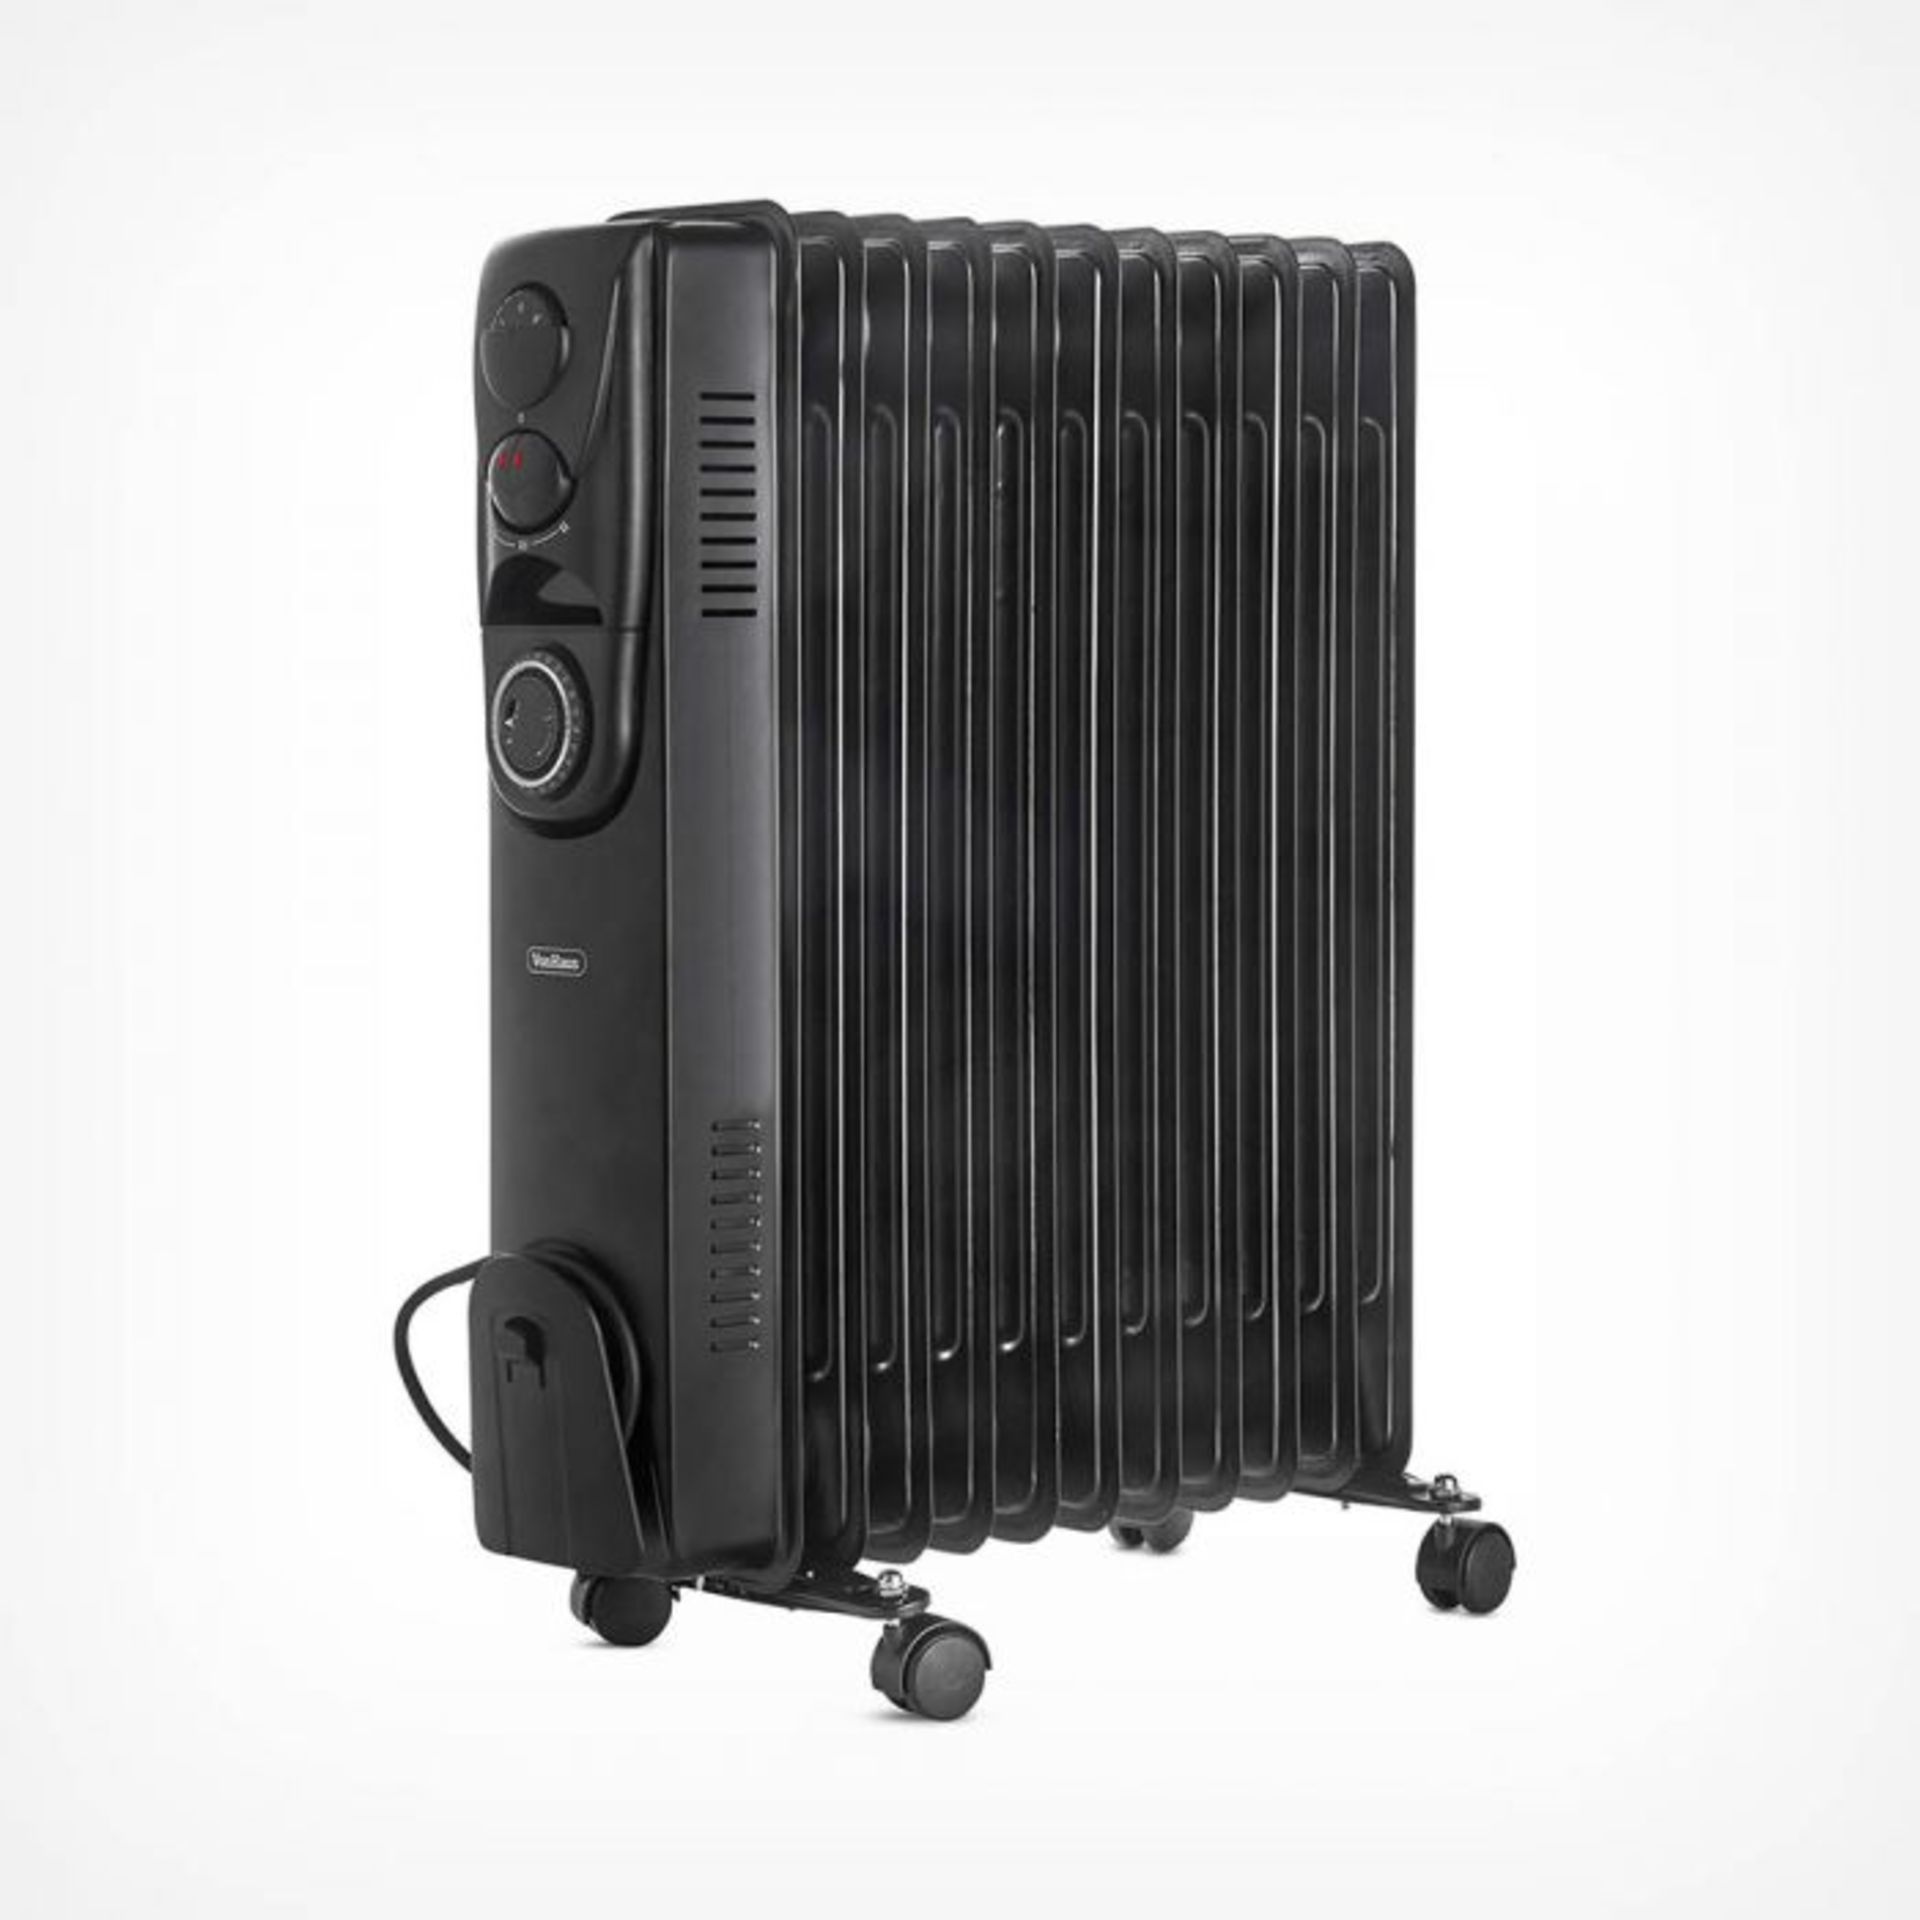 (V217) 11 Fin 2500W Oil Filled Radiator - Black 4.7 star rating53 Reviews 2500W radiator with... - Image 2 of 3